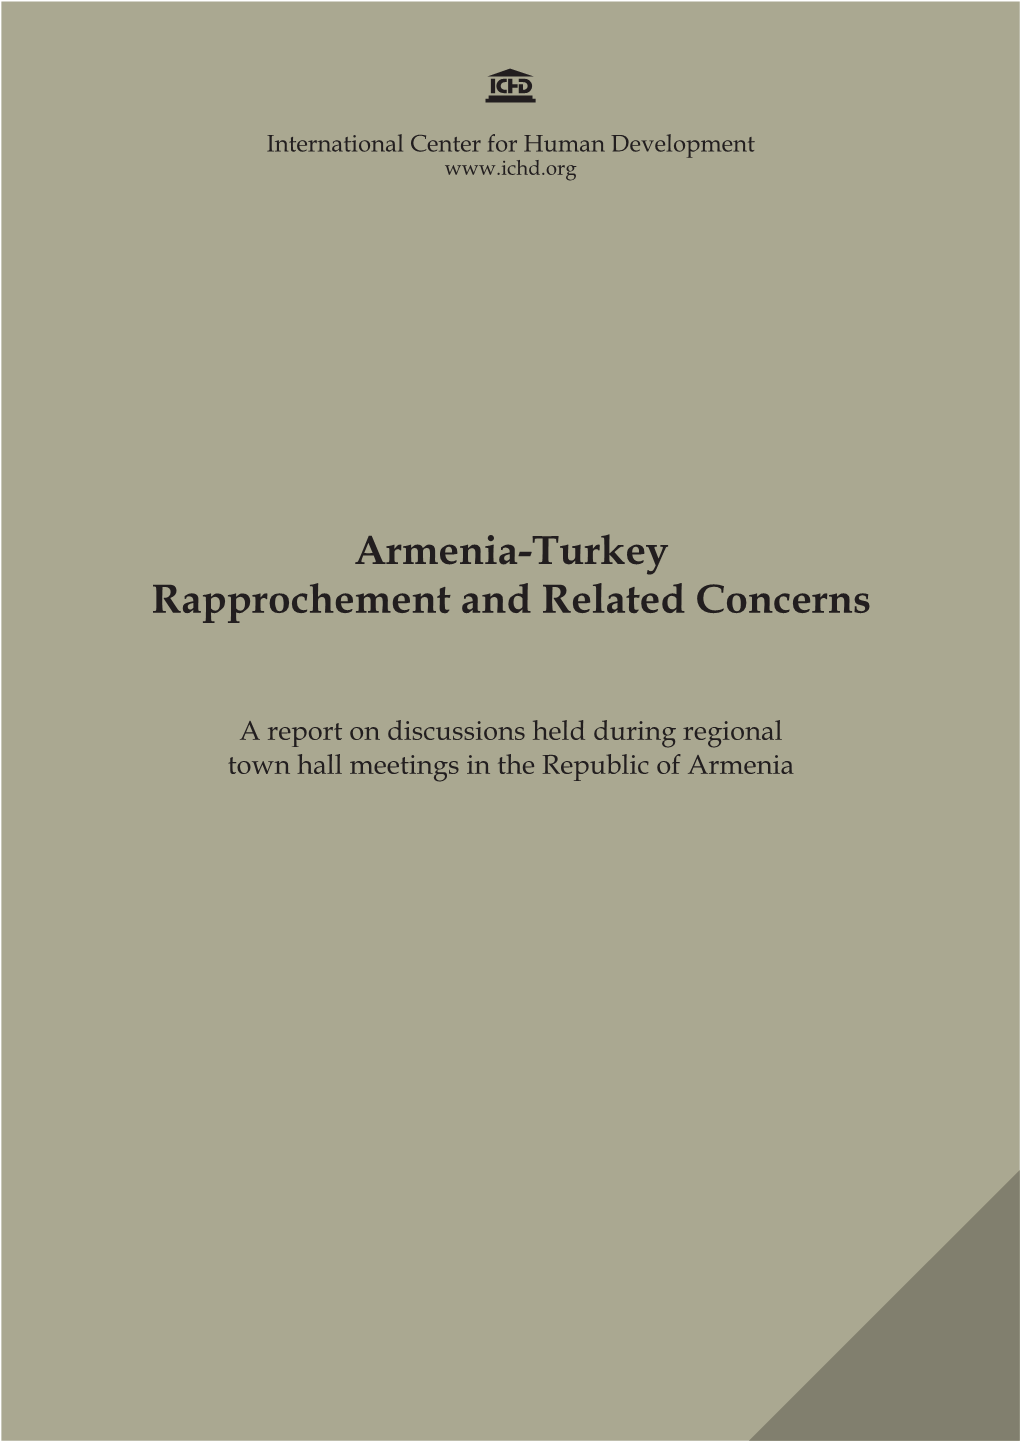 Armenia-Turkey Rapprochement and Related Concerns